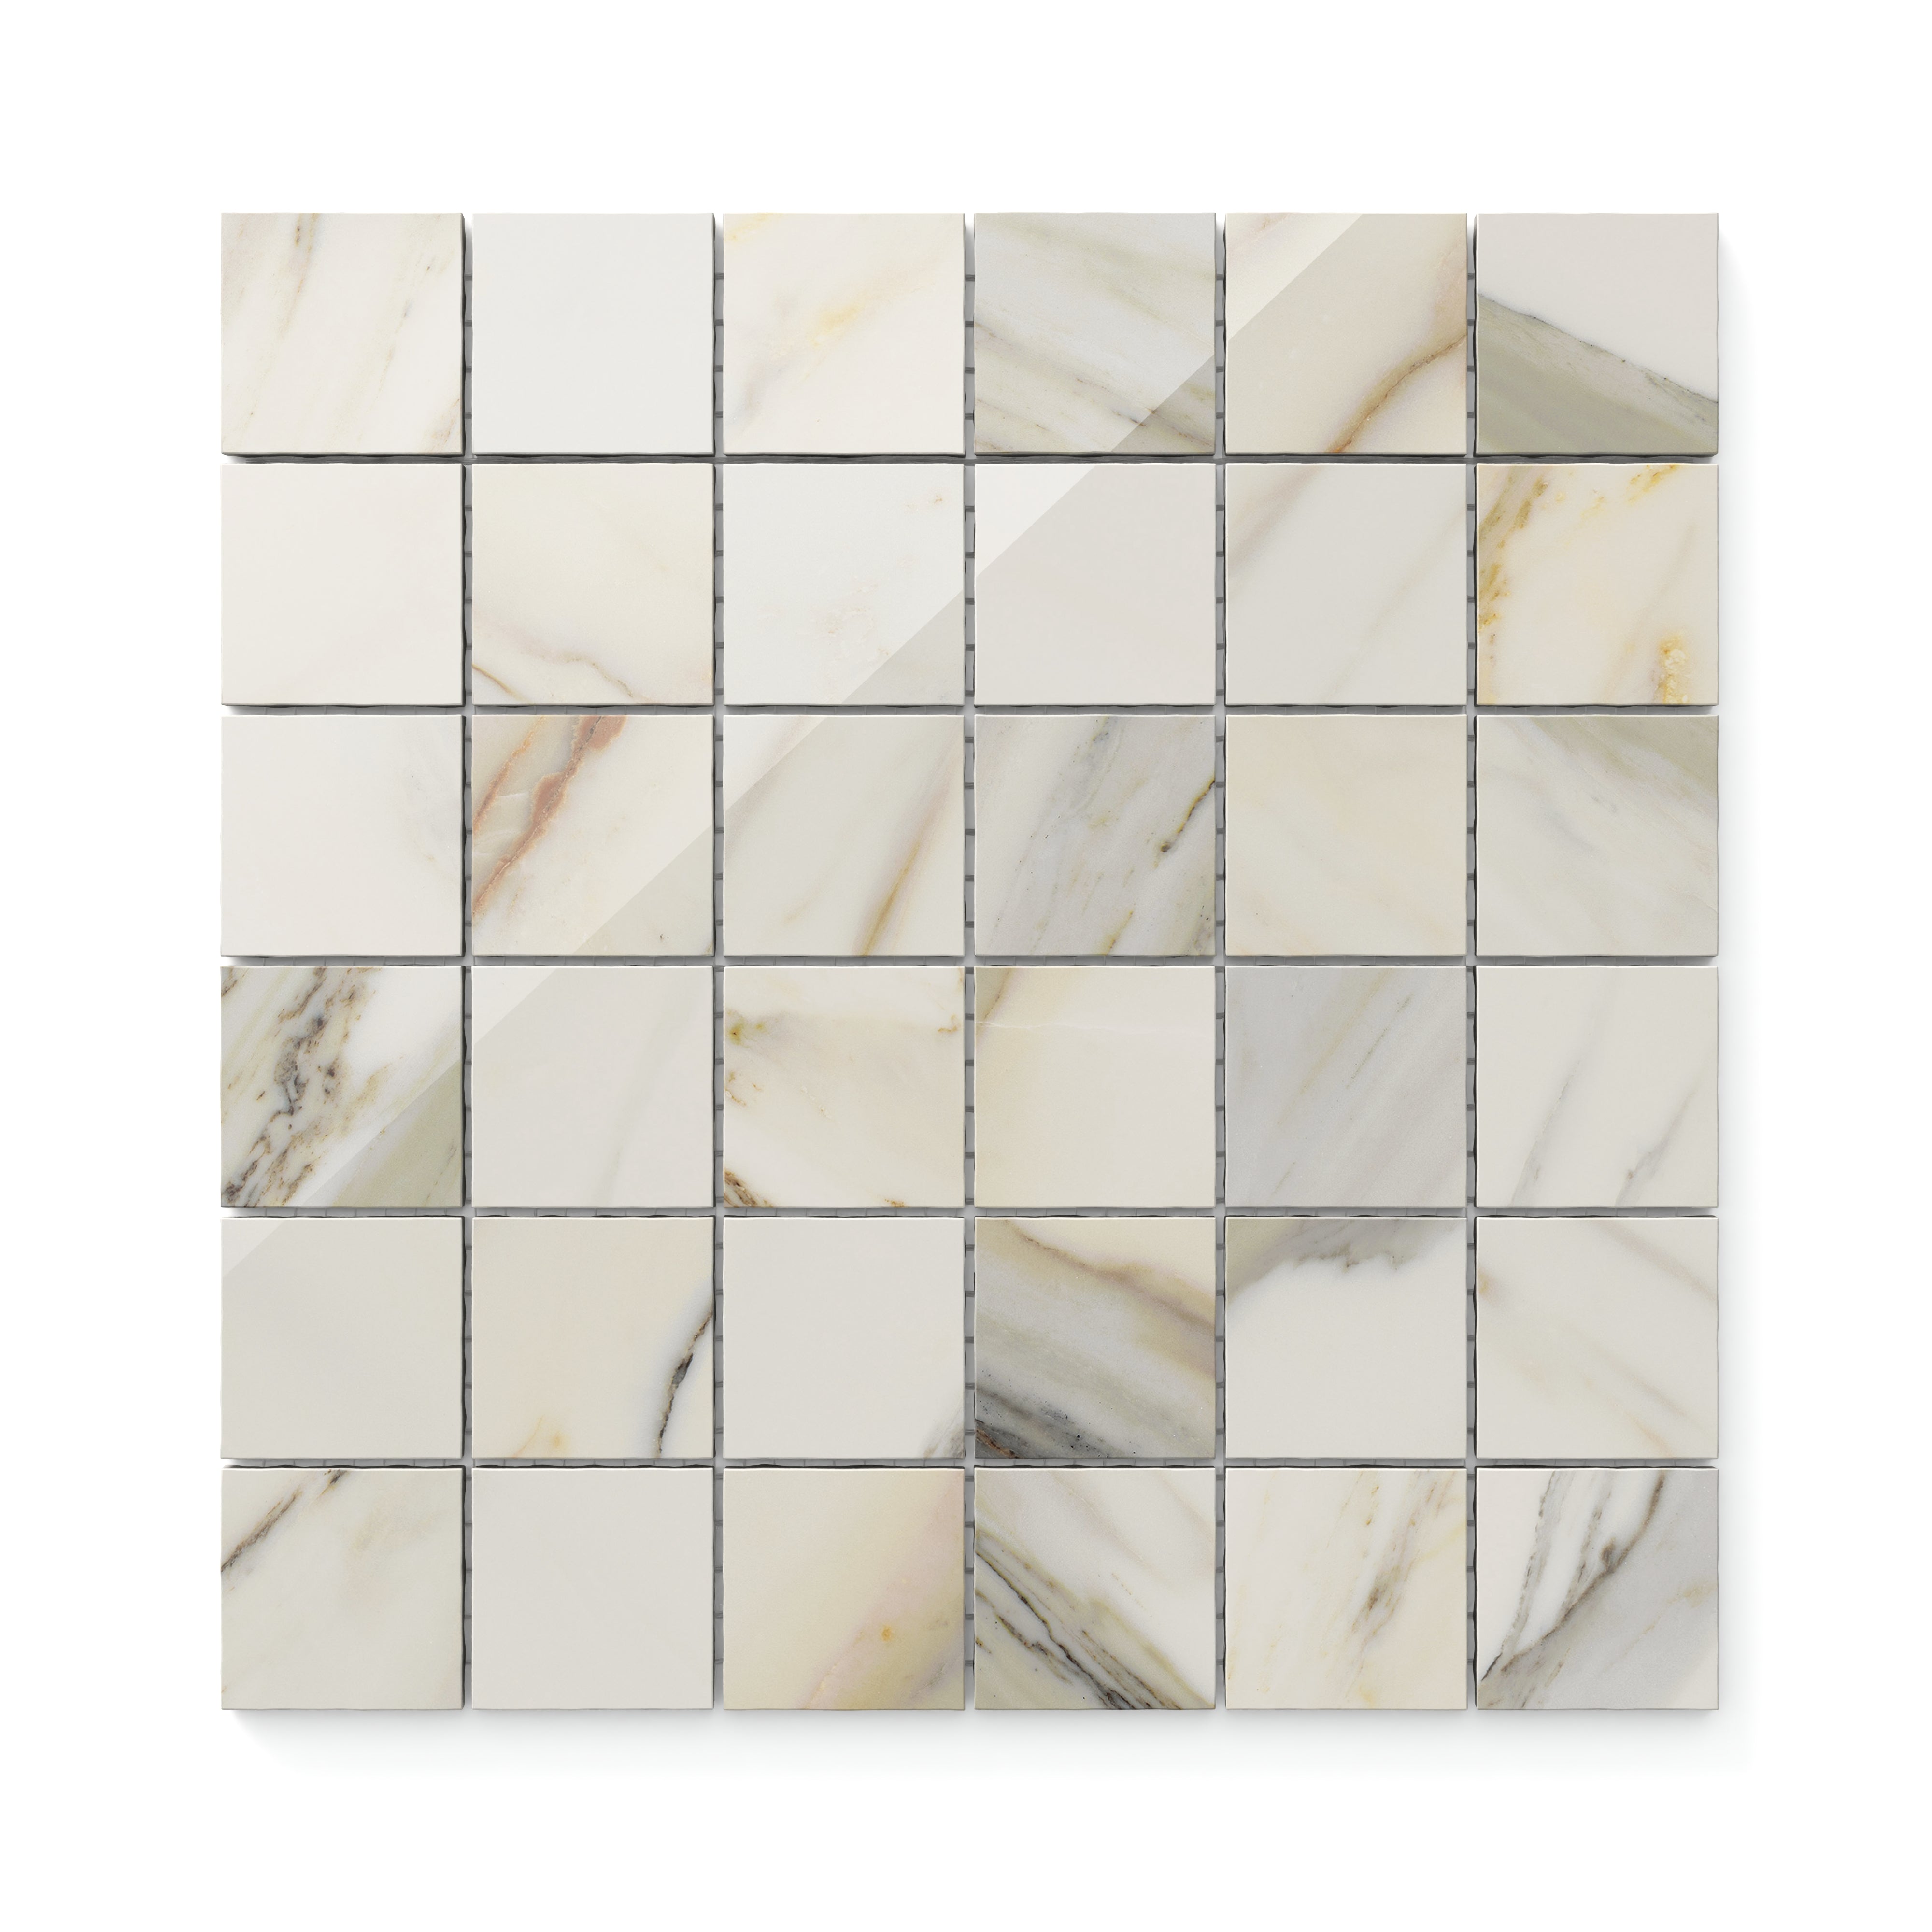 Aniston 2x2 Polished Porcelain Mosaic Tile in Calacatta Cremo